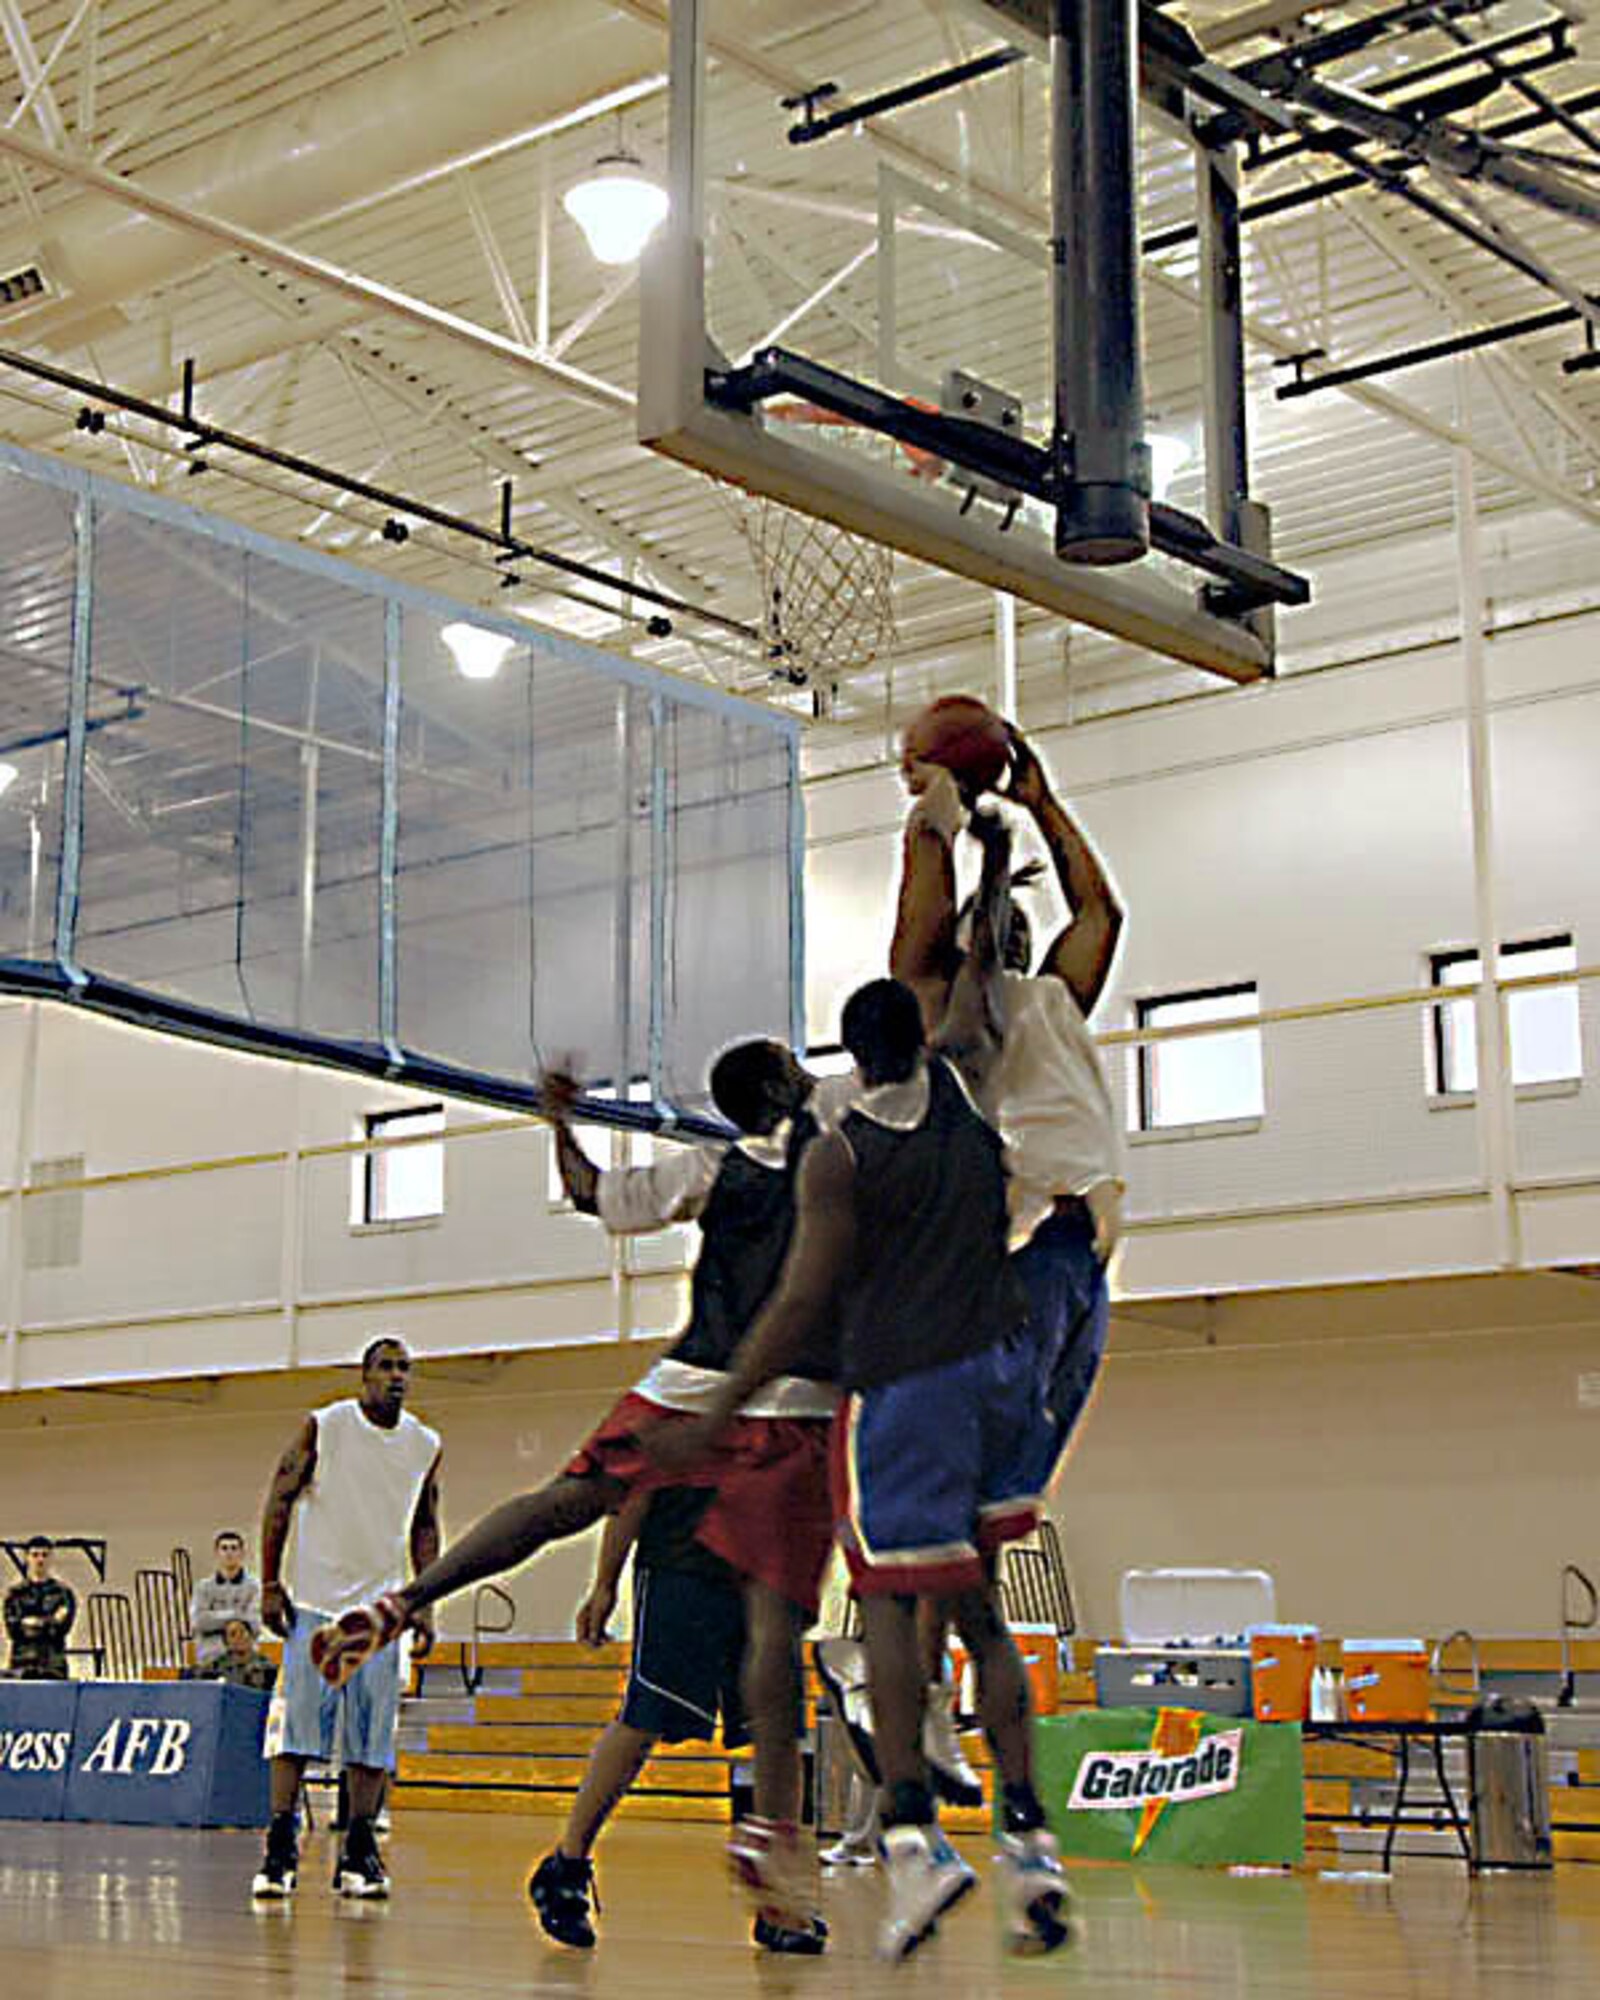 DYESS AIR FORCE BASE, Texas -- Two teams battle during the Love and Basketball Tournament Feb. 15 at the base gym. The tournament is one of the many events planned by the Black Heritage Committee for the month of February. (U.S. Air Force photo by Staff Sgt. Conner Estes)